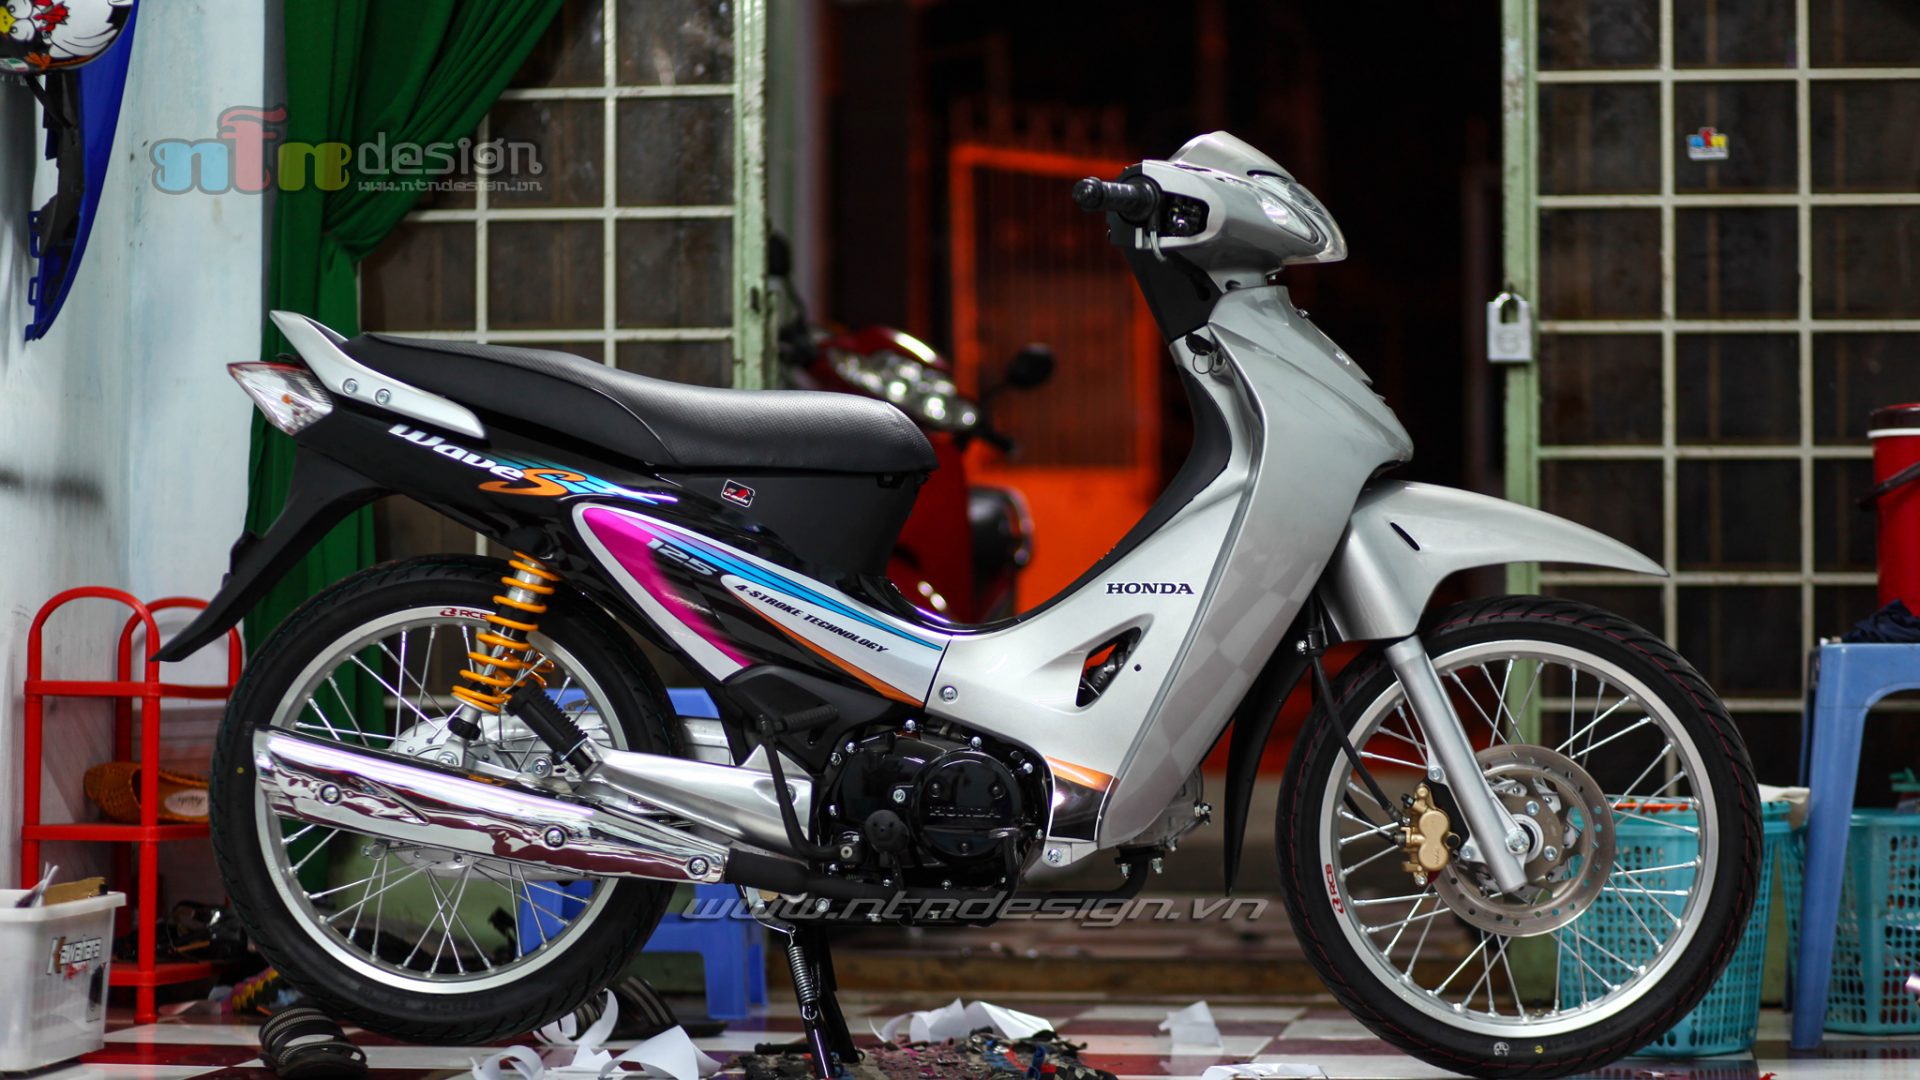 Honda Wave 125 Model 2011 for Sale in Pasig City National Capital Region  Classified  PhilippinesListedcom